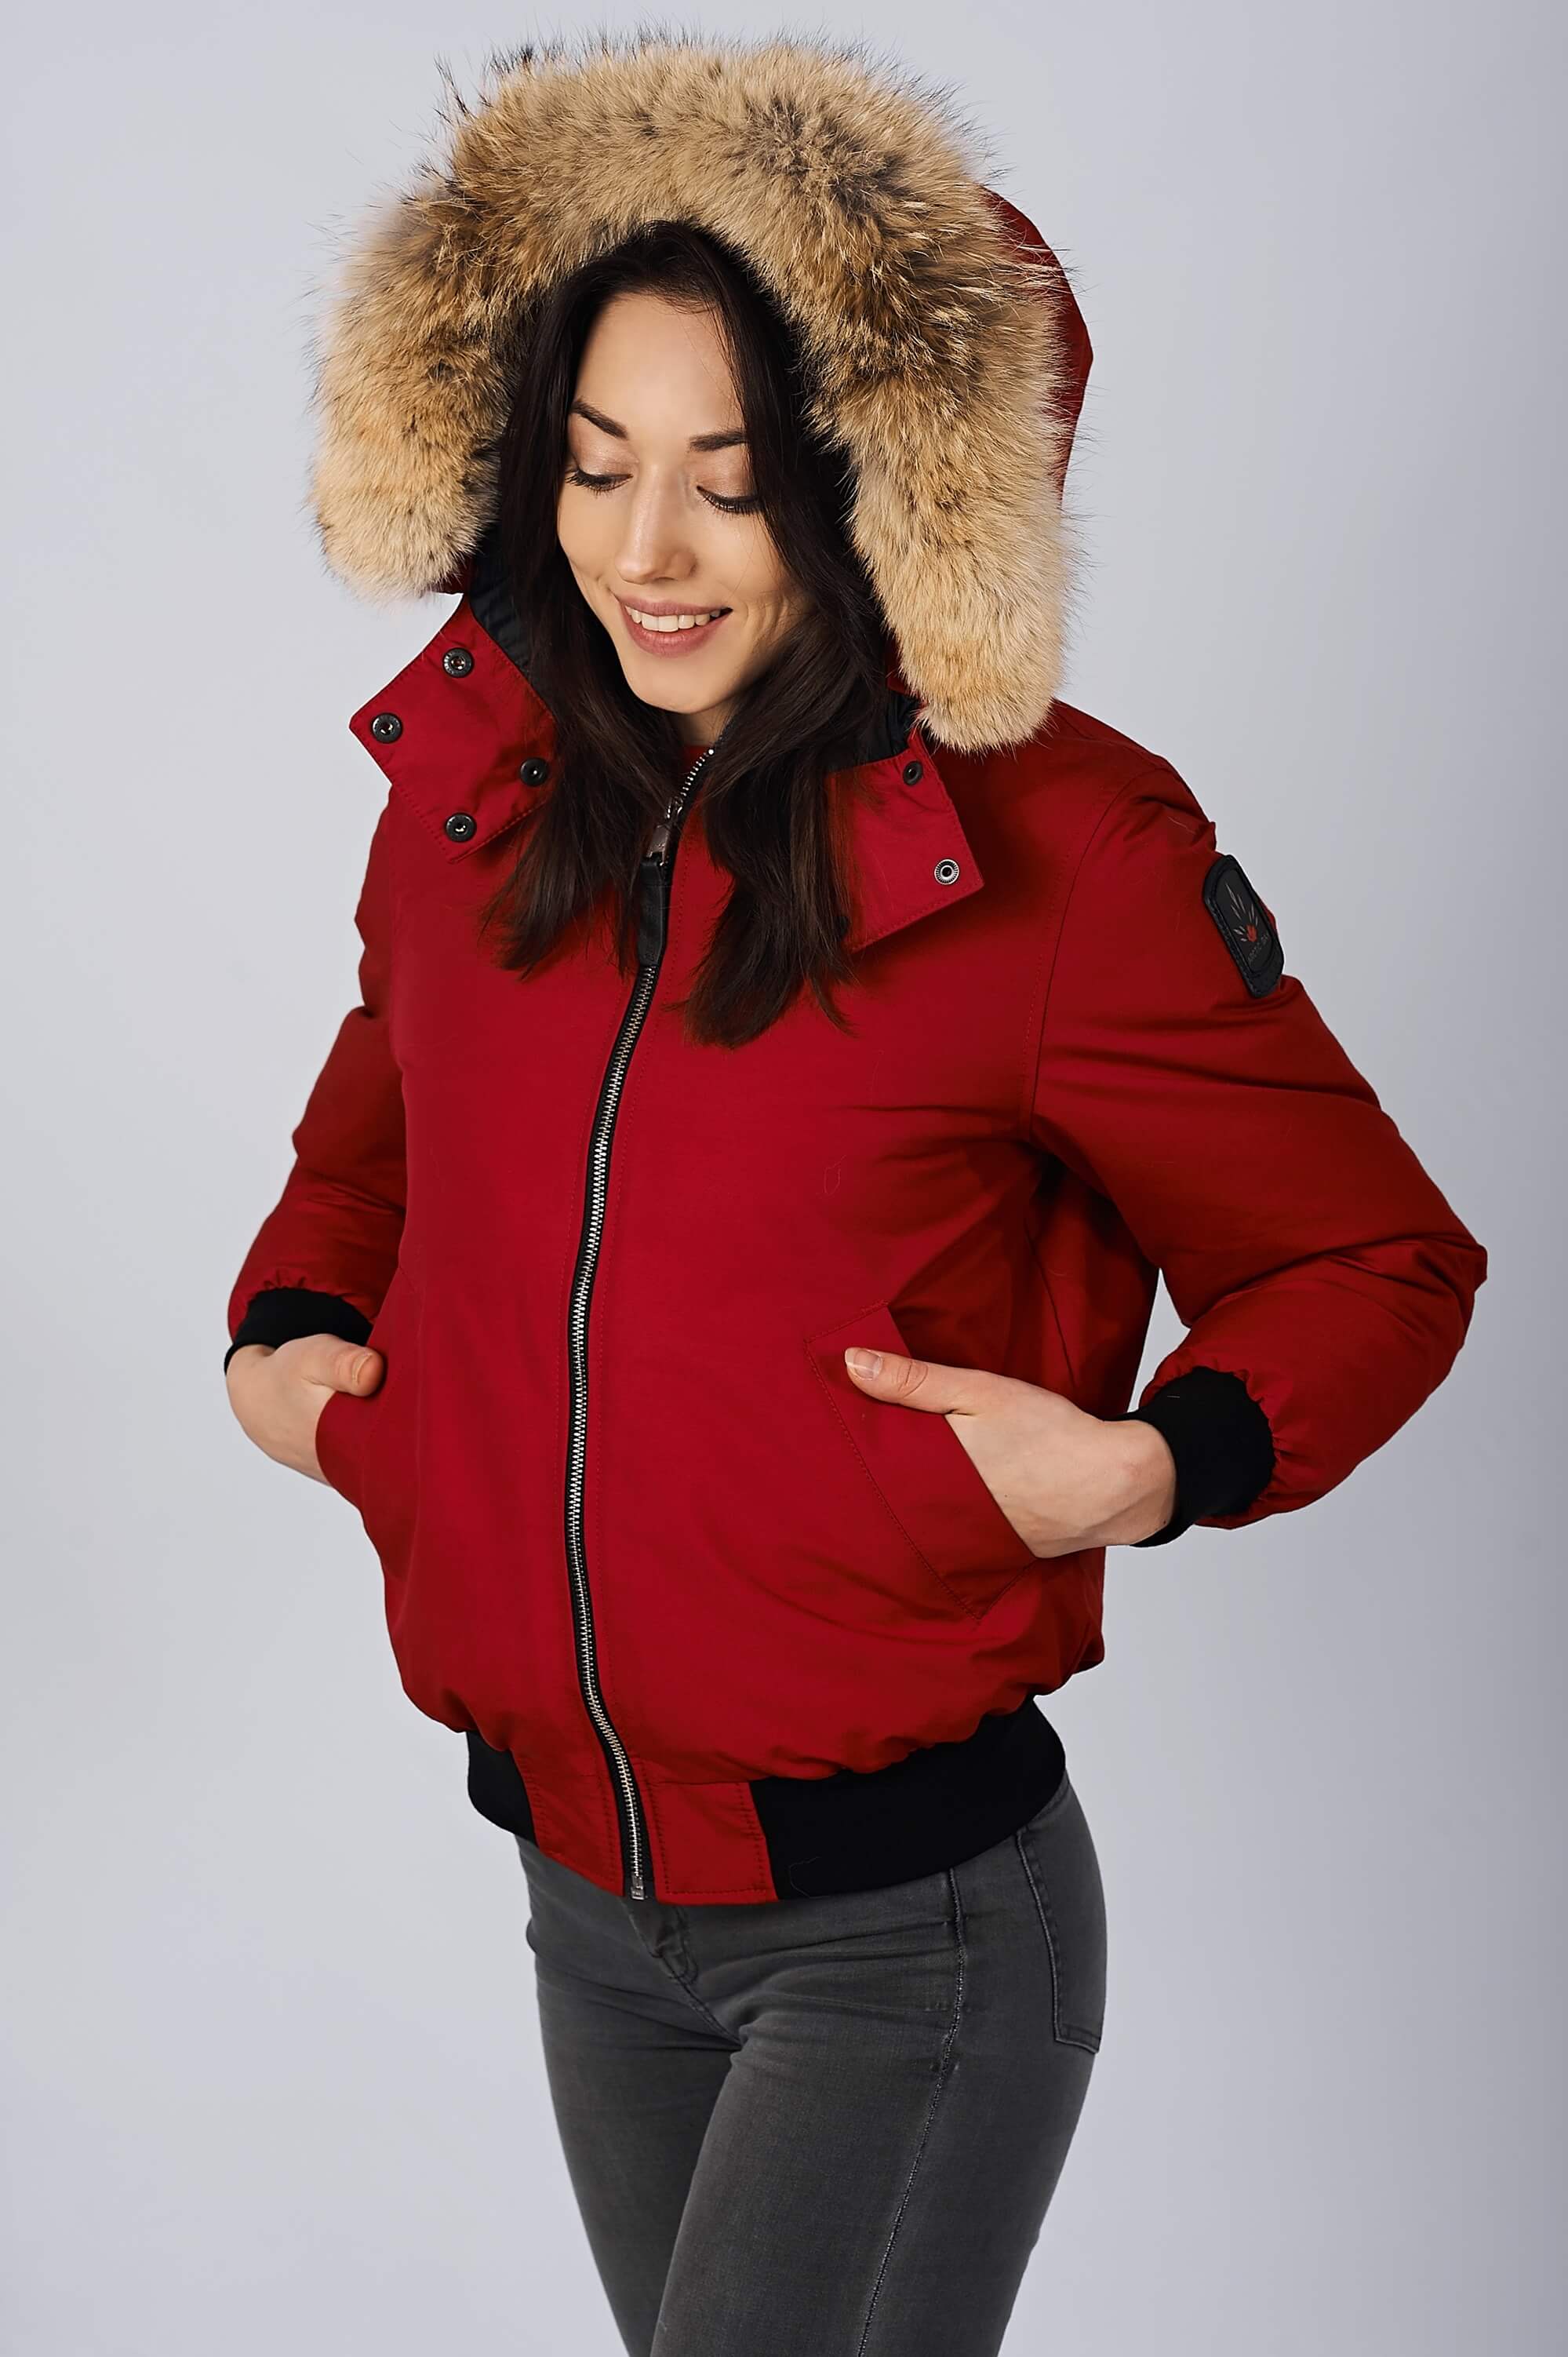 Down Winter Jackets for Women, Parkas made in Canada